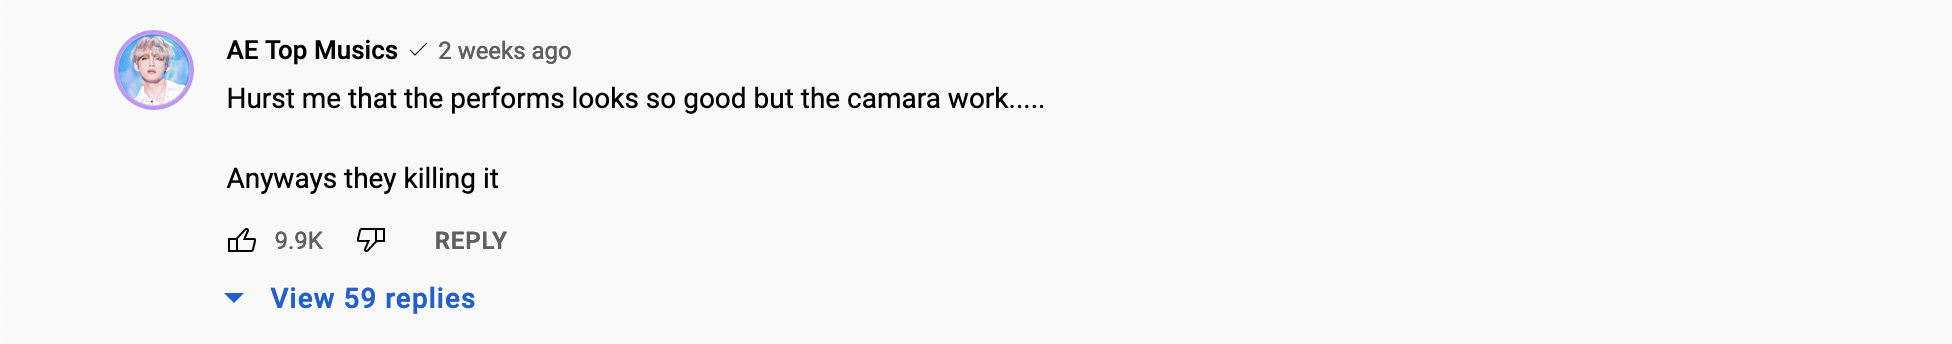 A screenshot of a YouTube comment from AE Top Musics saying "Hurst me that the performs looks so good but the camara work.....  Anyways they killing it"